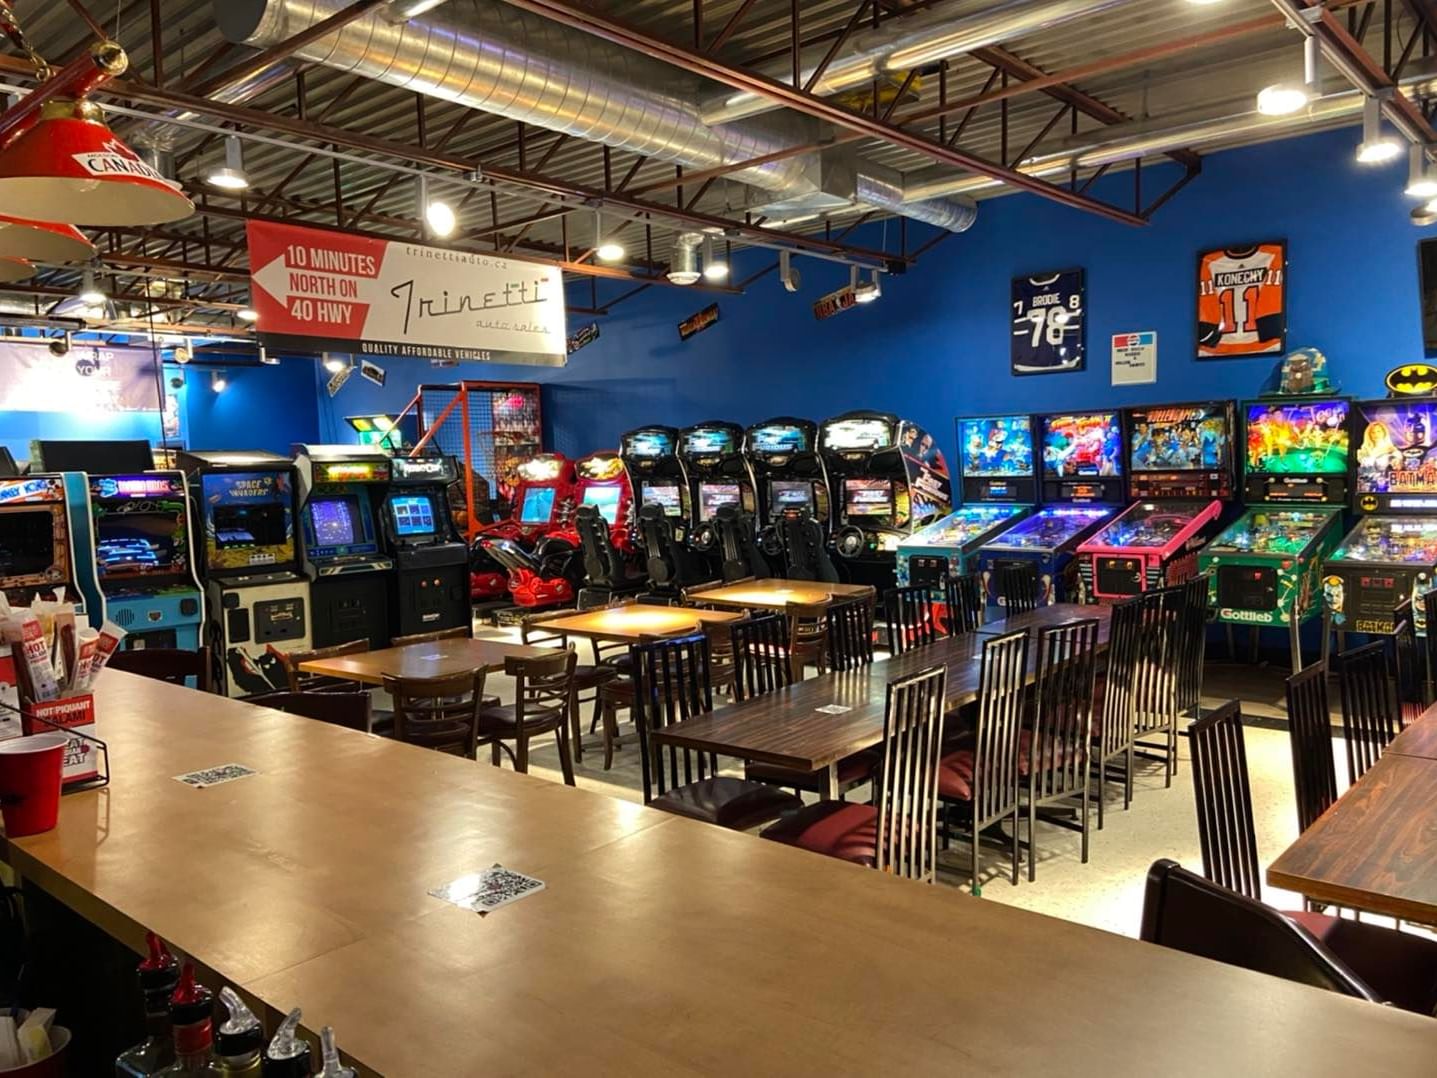 Barnetti's Arcade filled with arcade machines and tables near Retro Suites Hotel